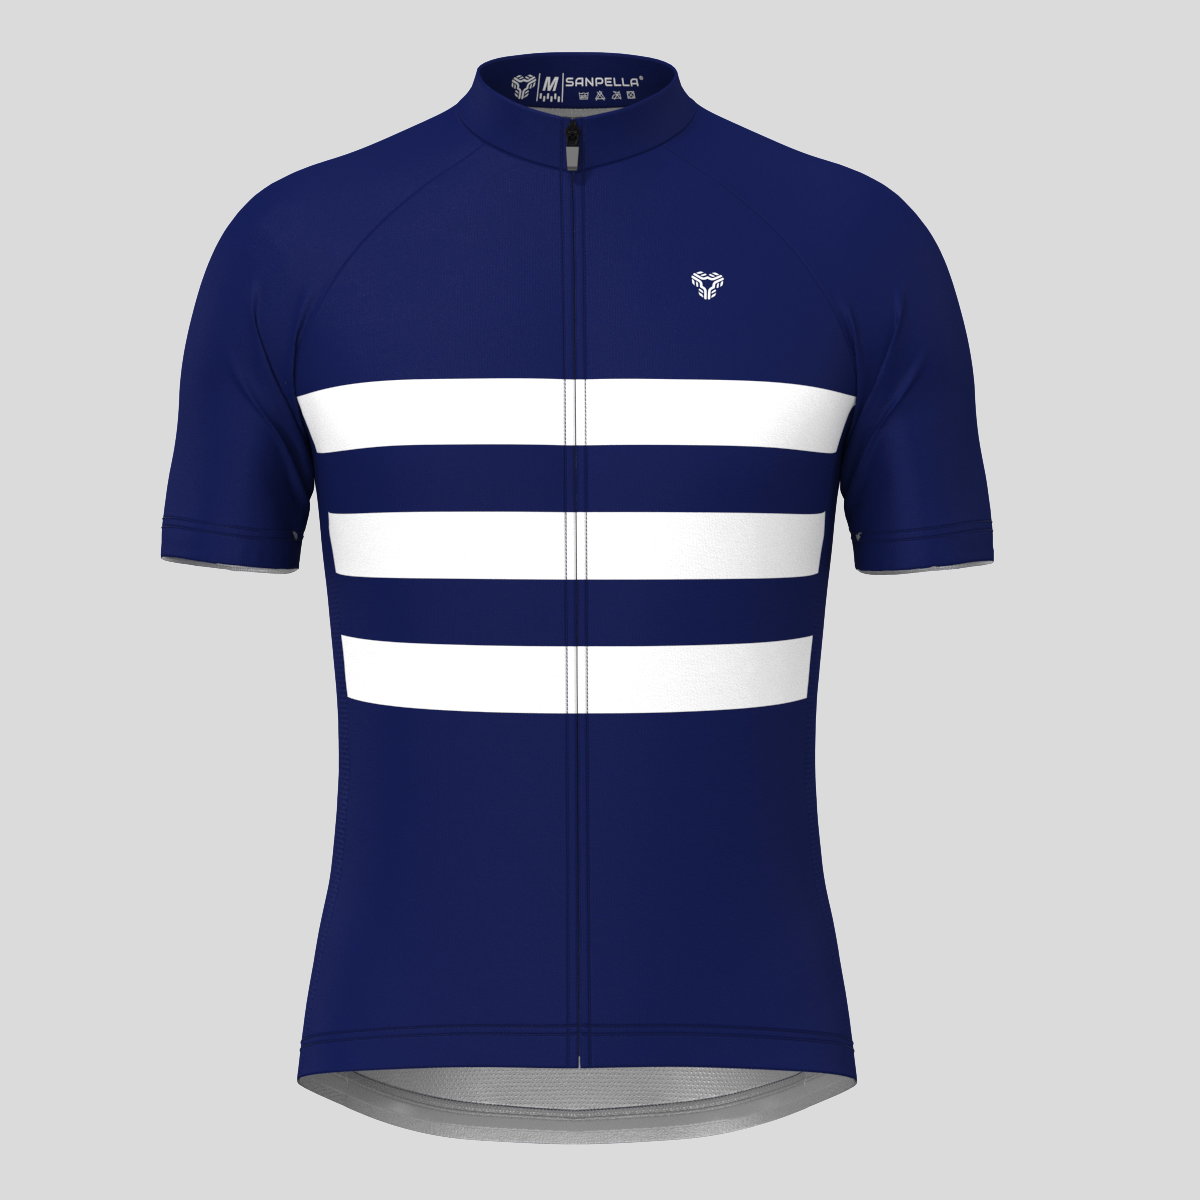 Men's Classic Stripes Cycling Jersey - Ink